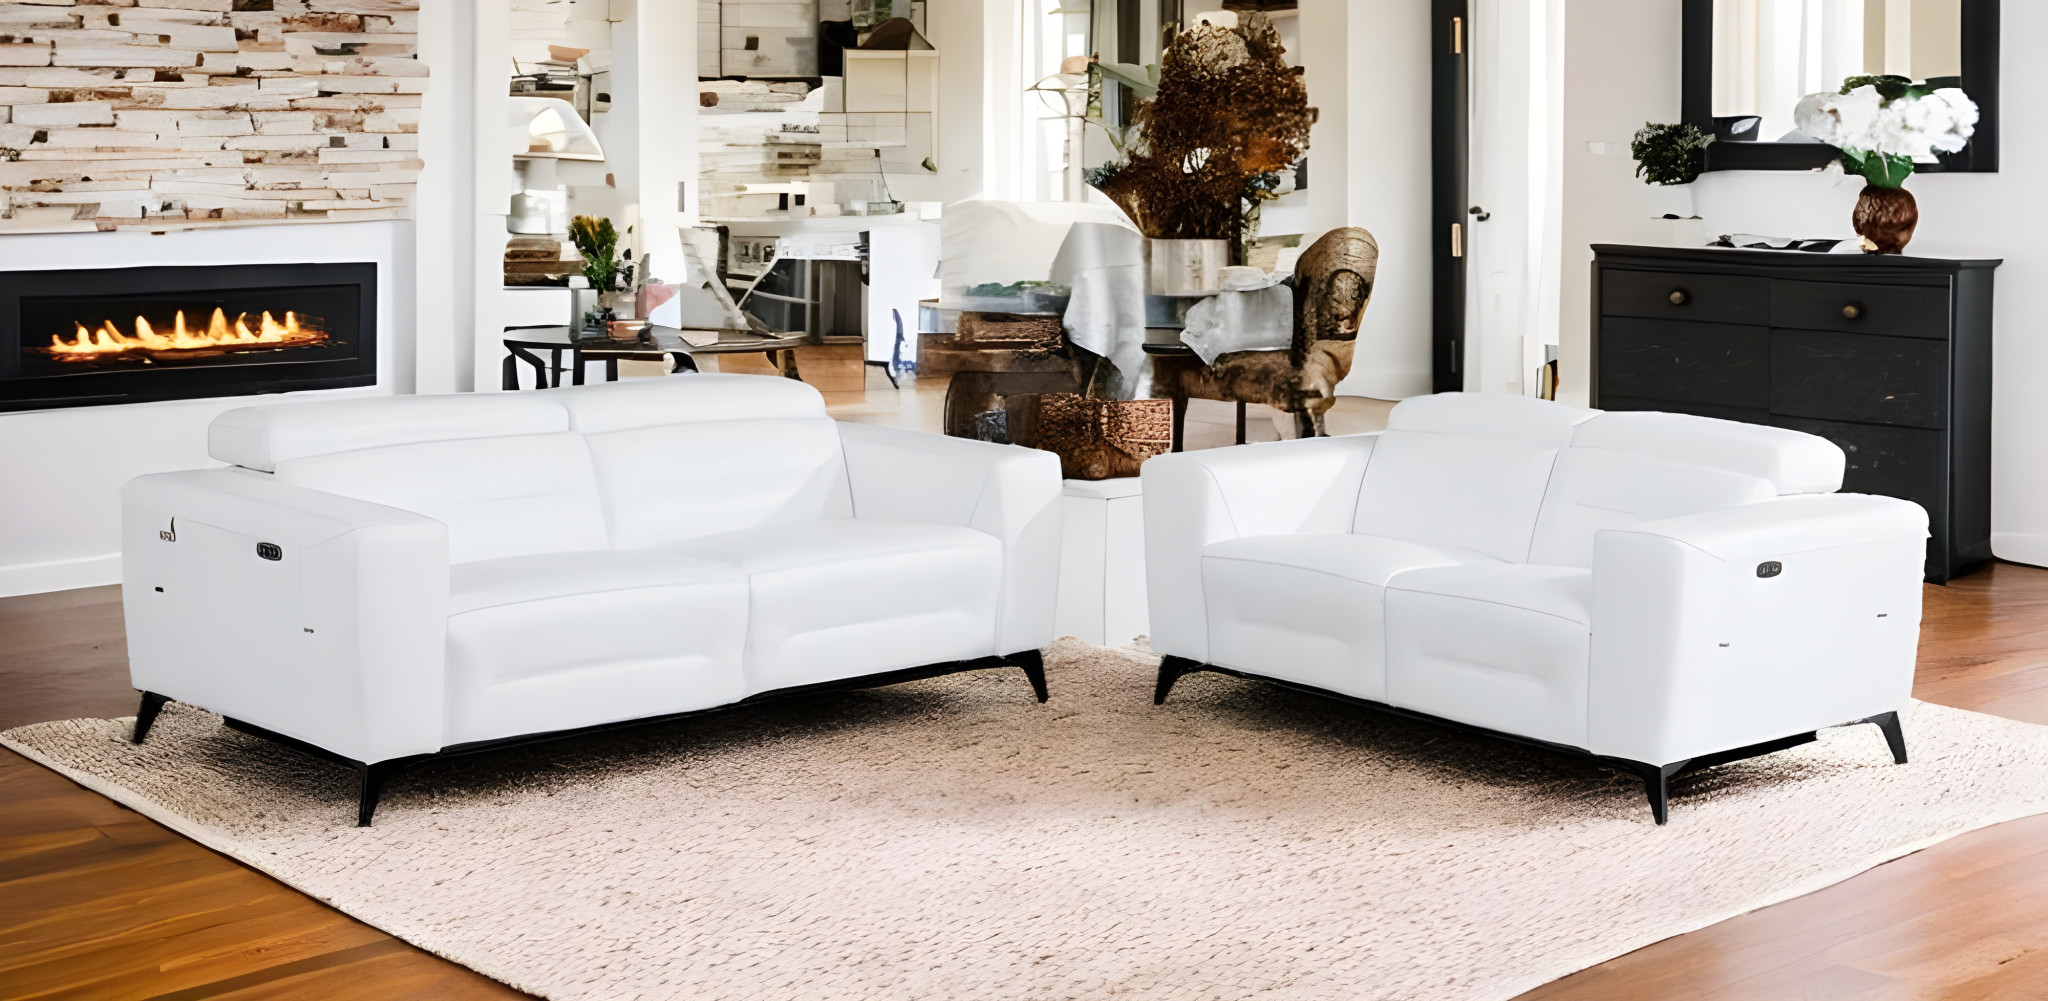 Two Piece Indoor White Italian Leather Five Person Seating Set-480885-1